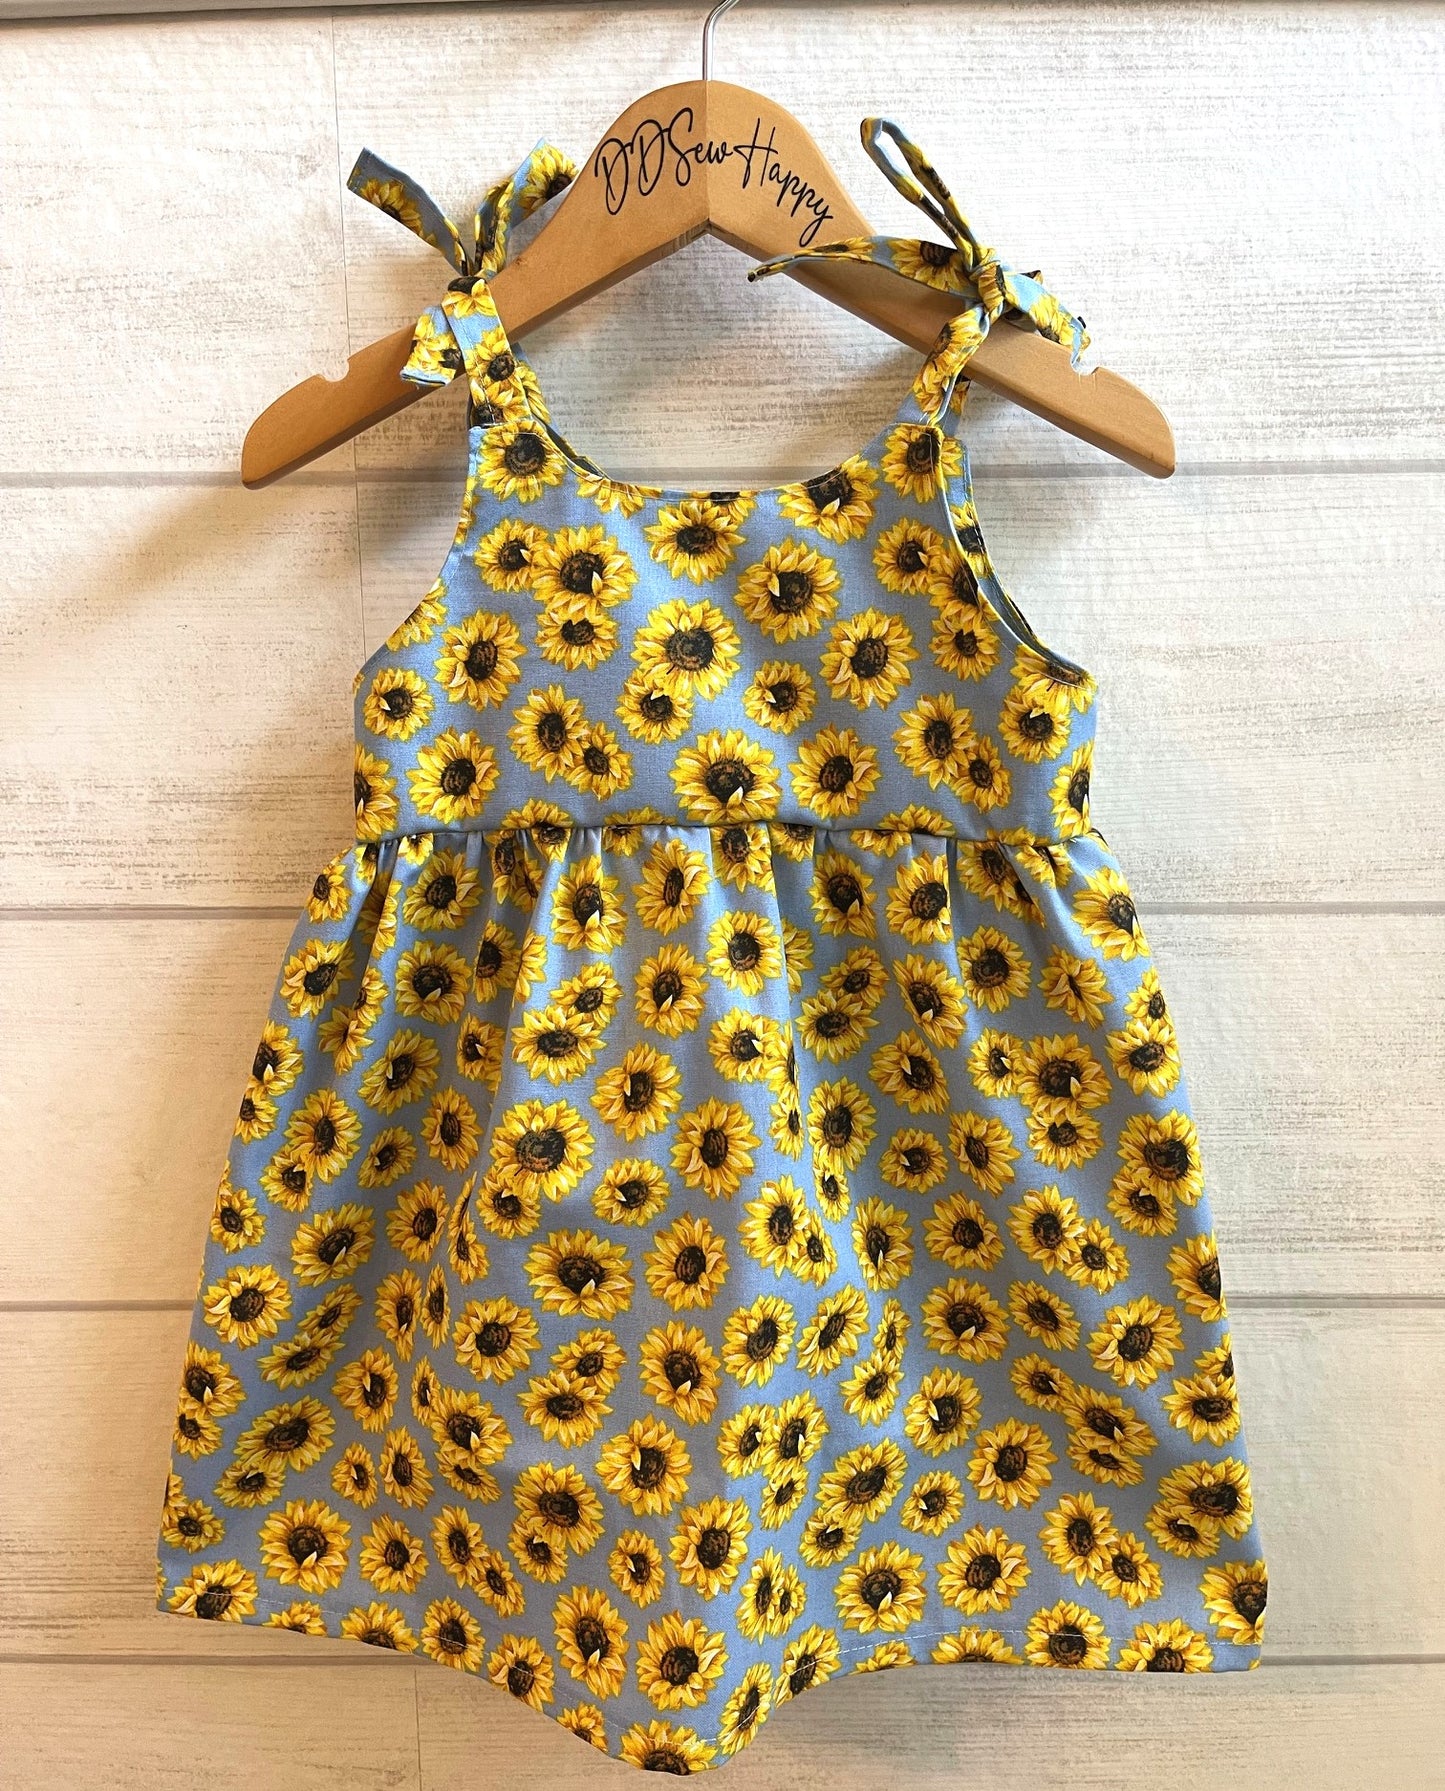 Girls and Toddlers SUNFLOWERS LIGHT BLUE Boho Style Sundress with Shoulder Ties